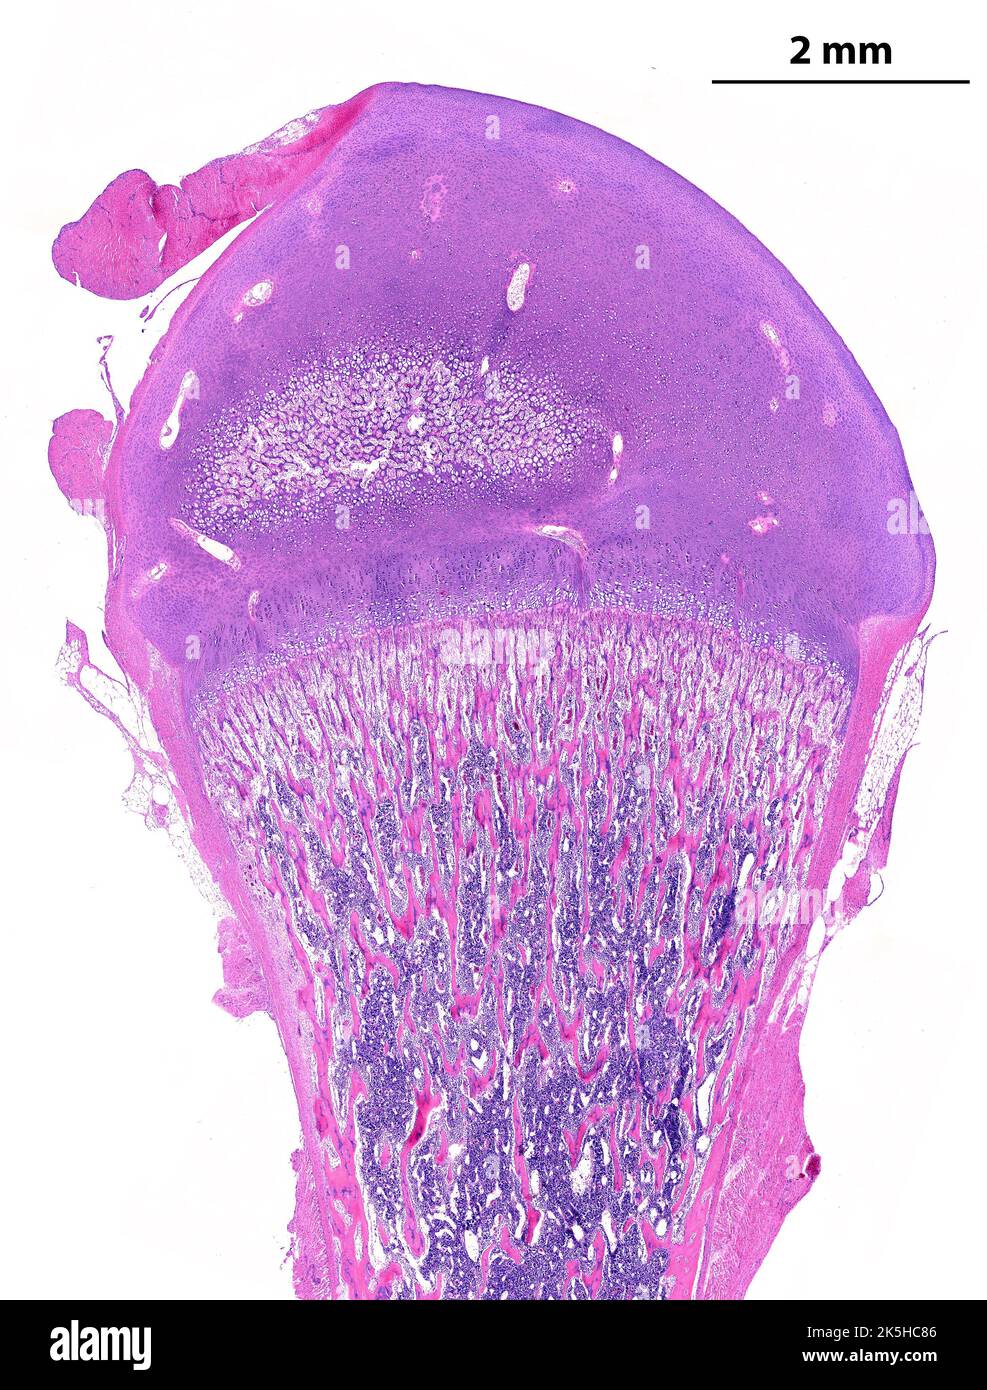 Low power light microscope micrograph showing a developing long bone (femur). On top, the epiphysis is made by hyaline cartilage that shows an initial Stock Photo